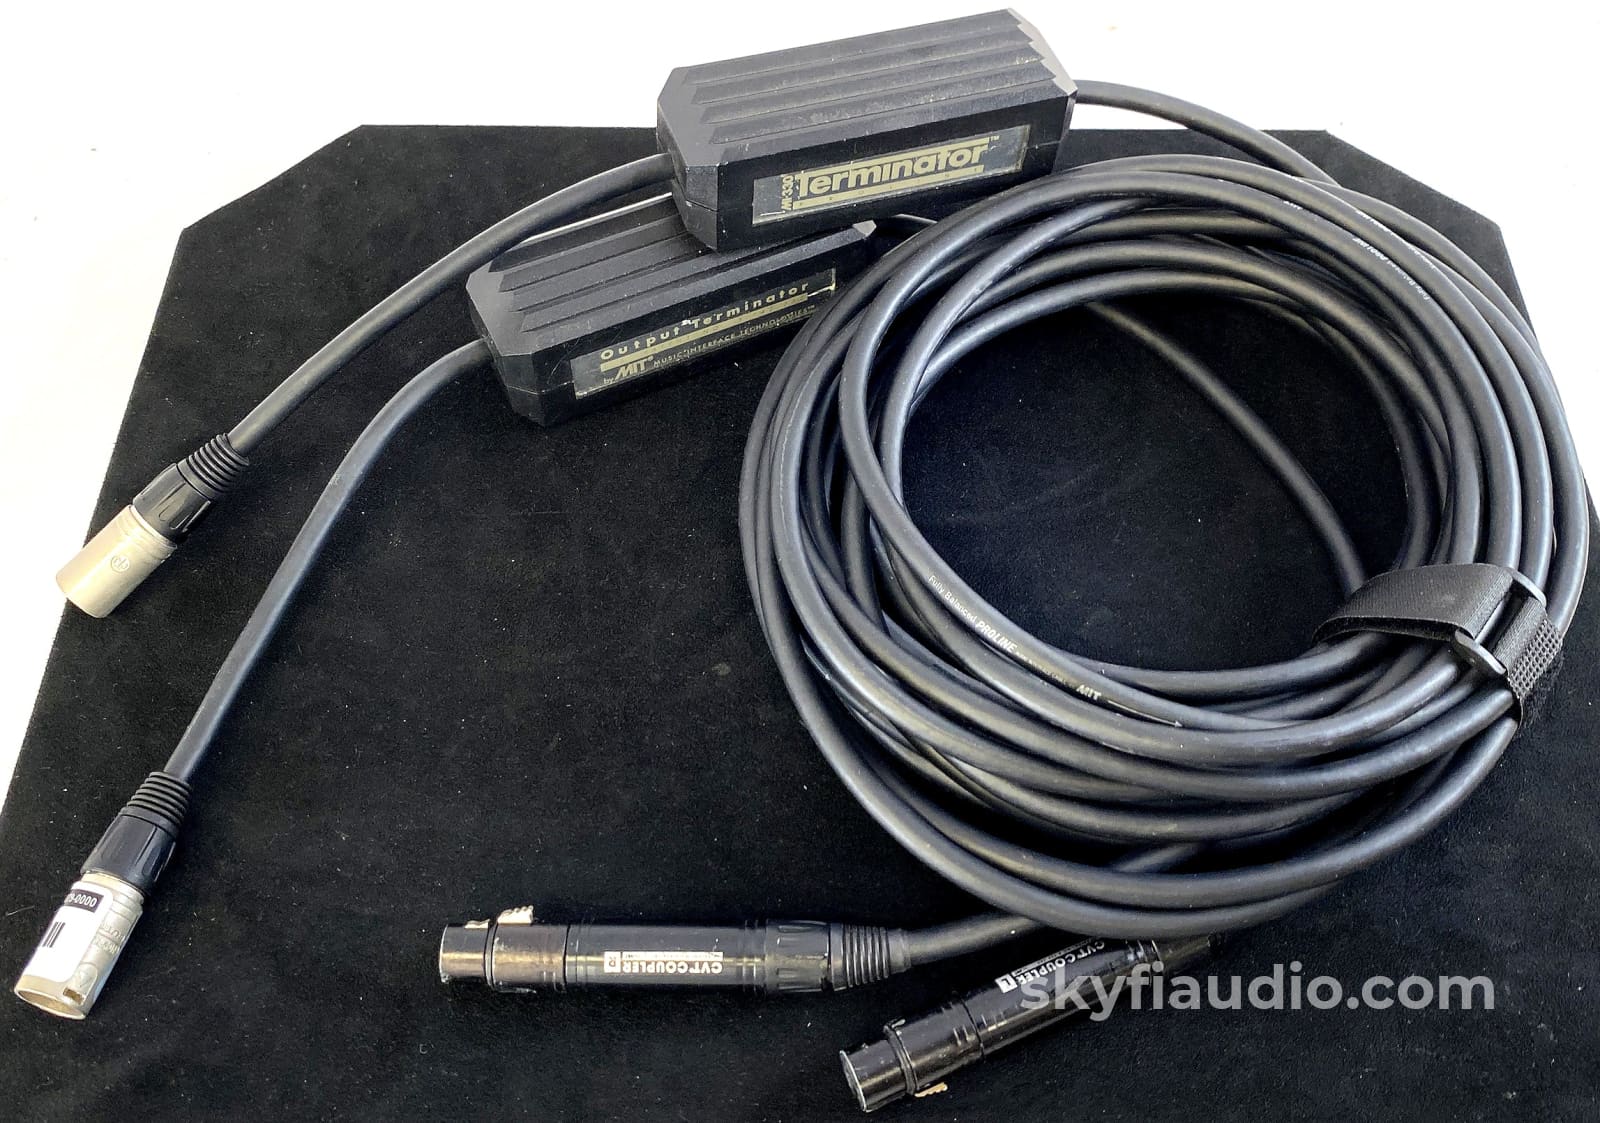 Mit (Music Interface Technology) Mi-330 Fully Balanced Stereo Xlr Audio Cable - 6M Cables